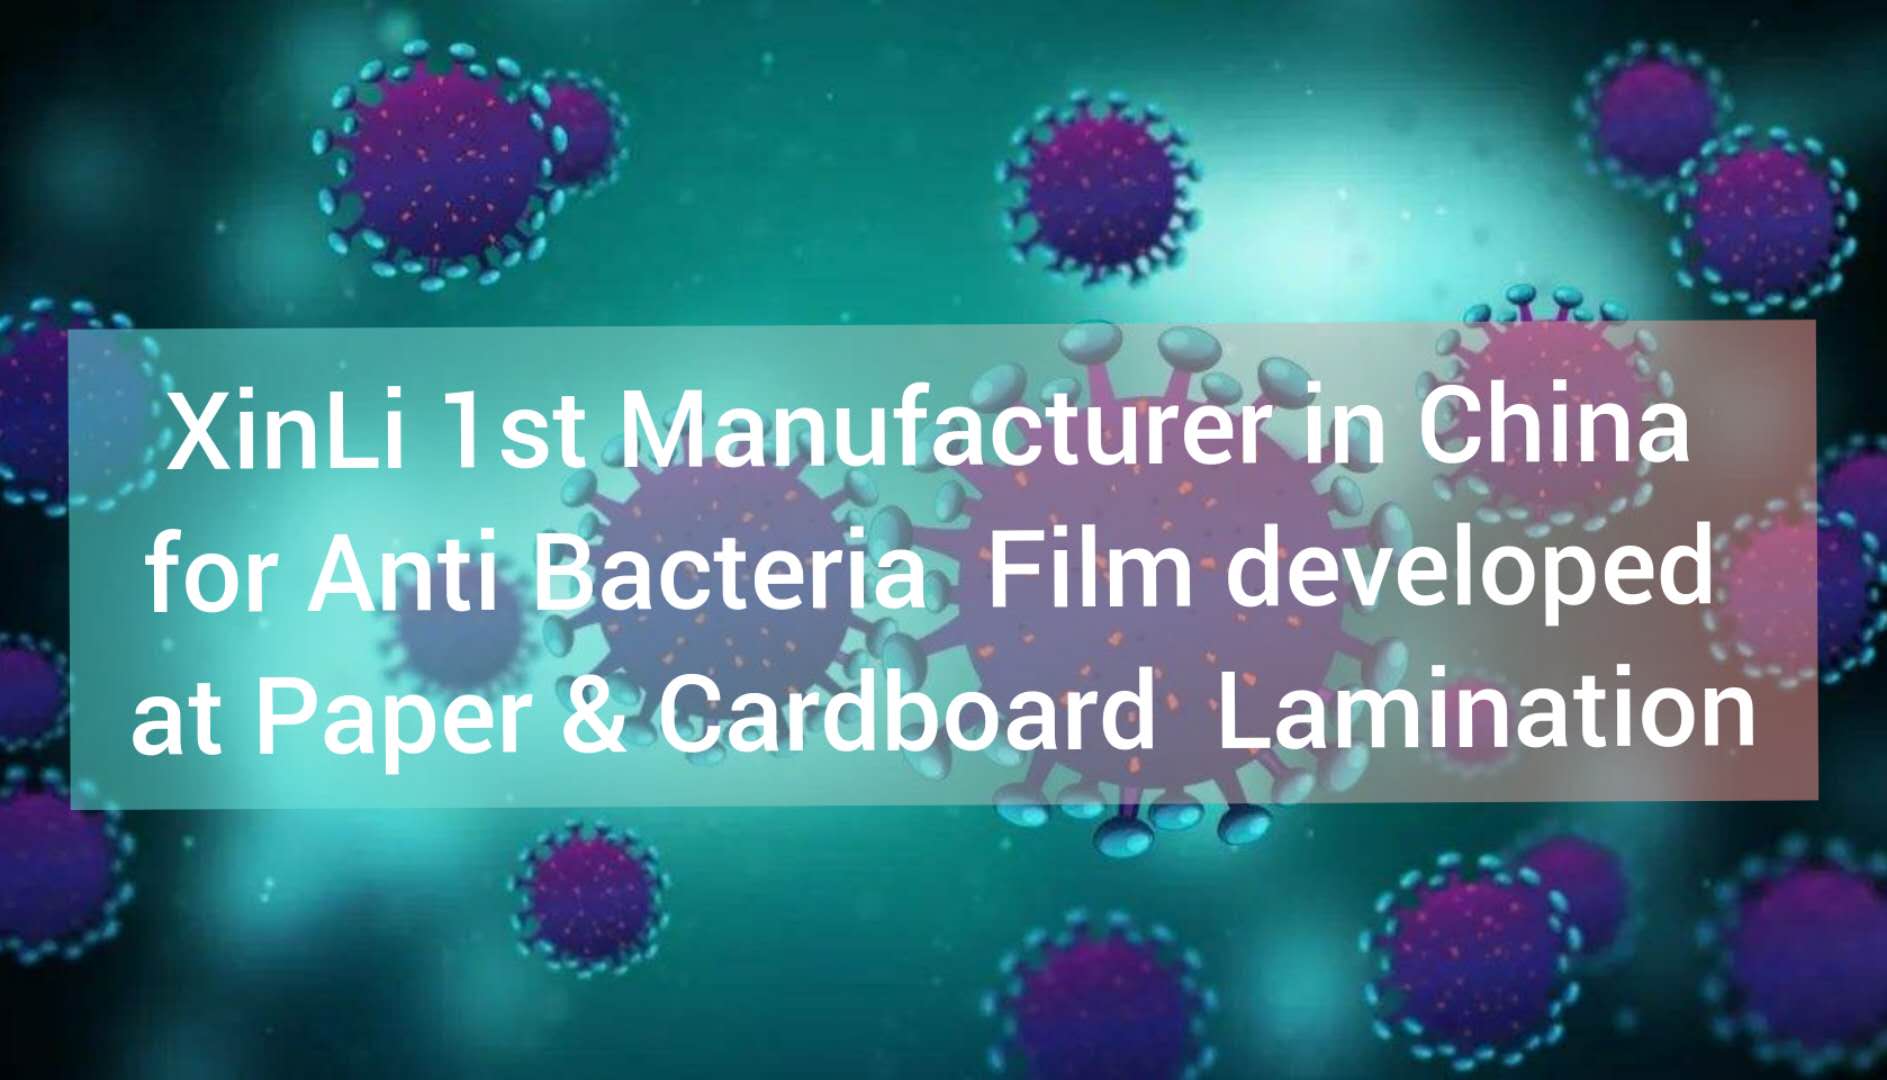 Hot news - XinLi BacterStop(Anti-microbial) films Launched